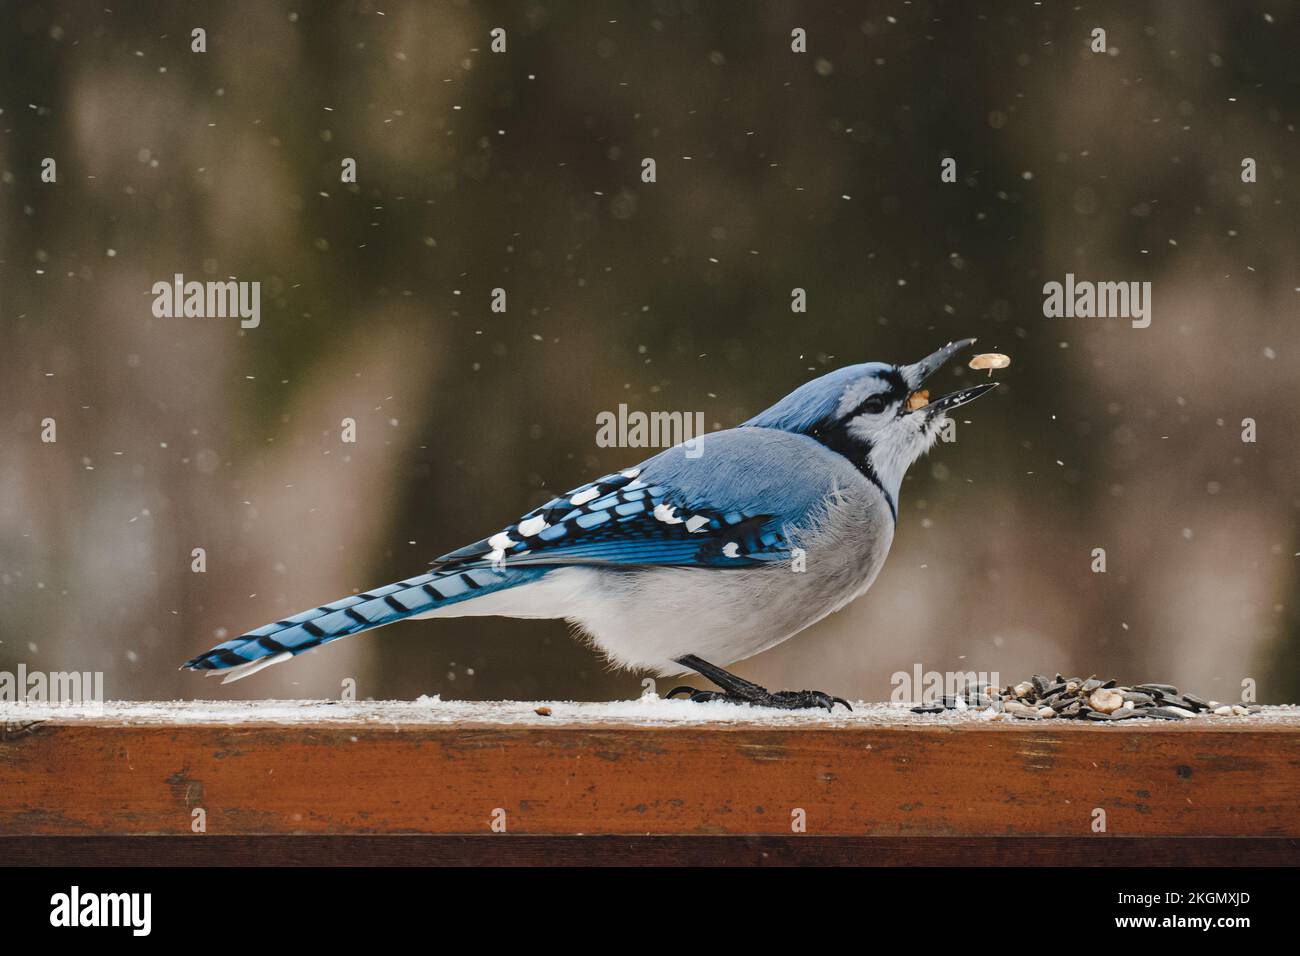 A closeup of a blue jay bird perched on a wooden fence during Winter Stock Photo